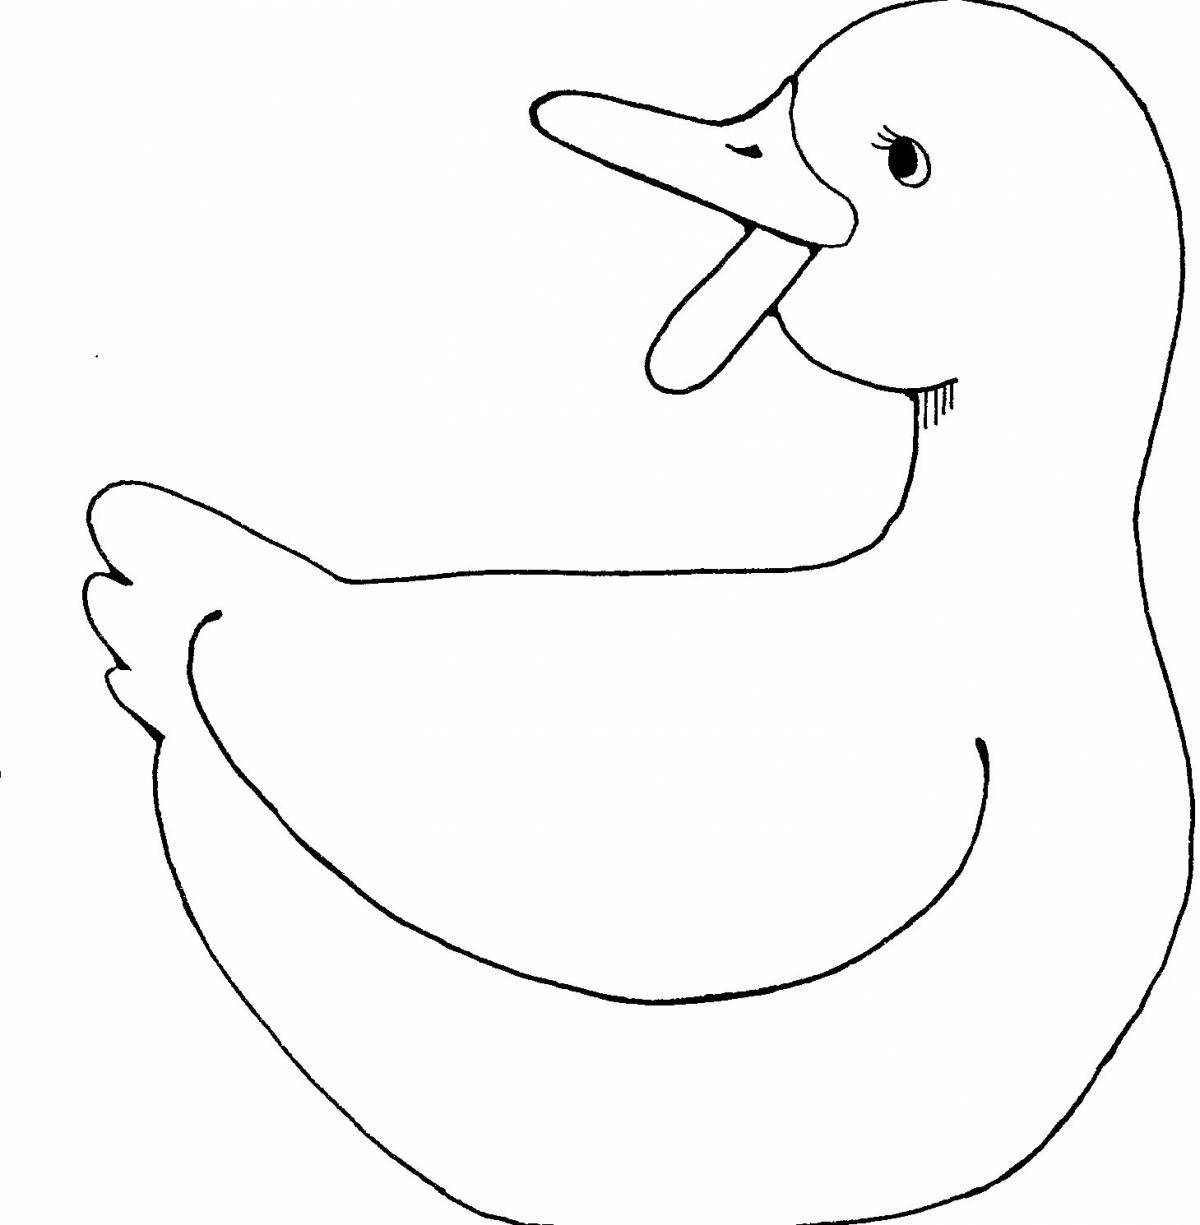 Adorable Dymkovo duck toy coloring book for children